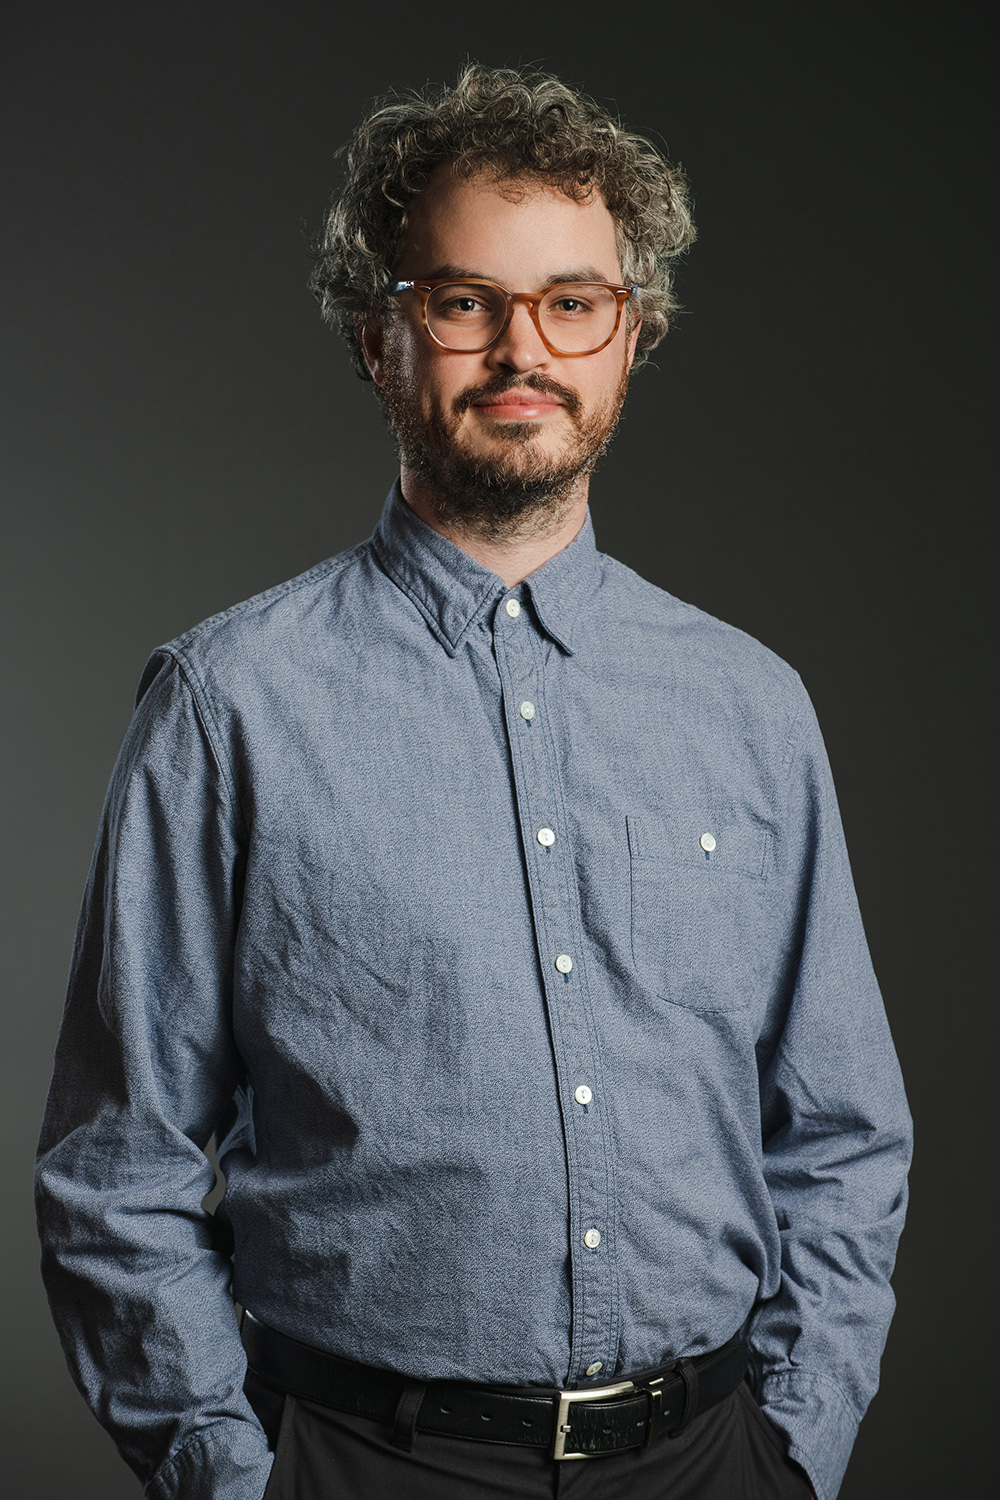 Color photograph of a light skinned man wearing glasses a blue button-up shirt; he looks at the camera with his hands in his pockets